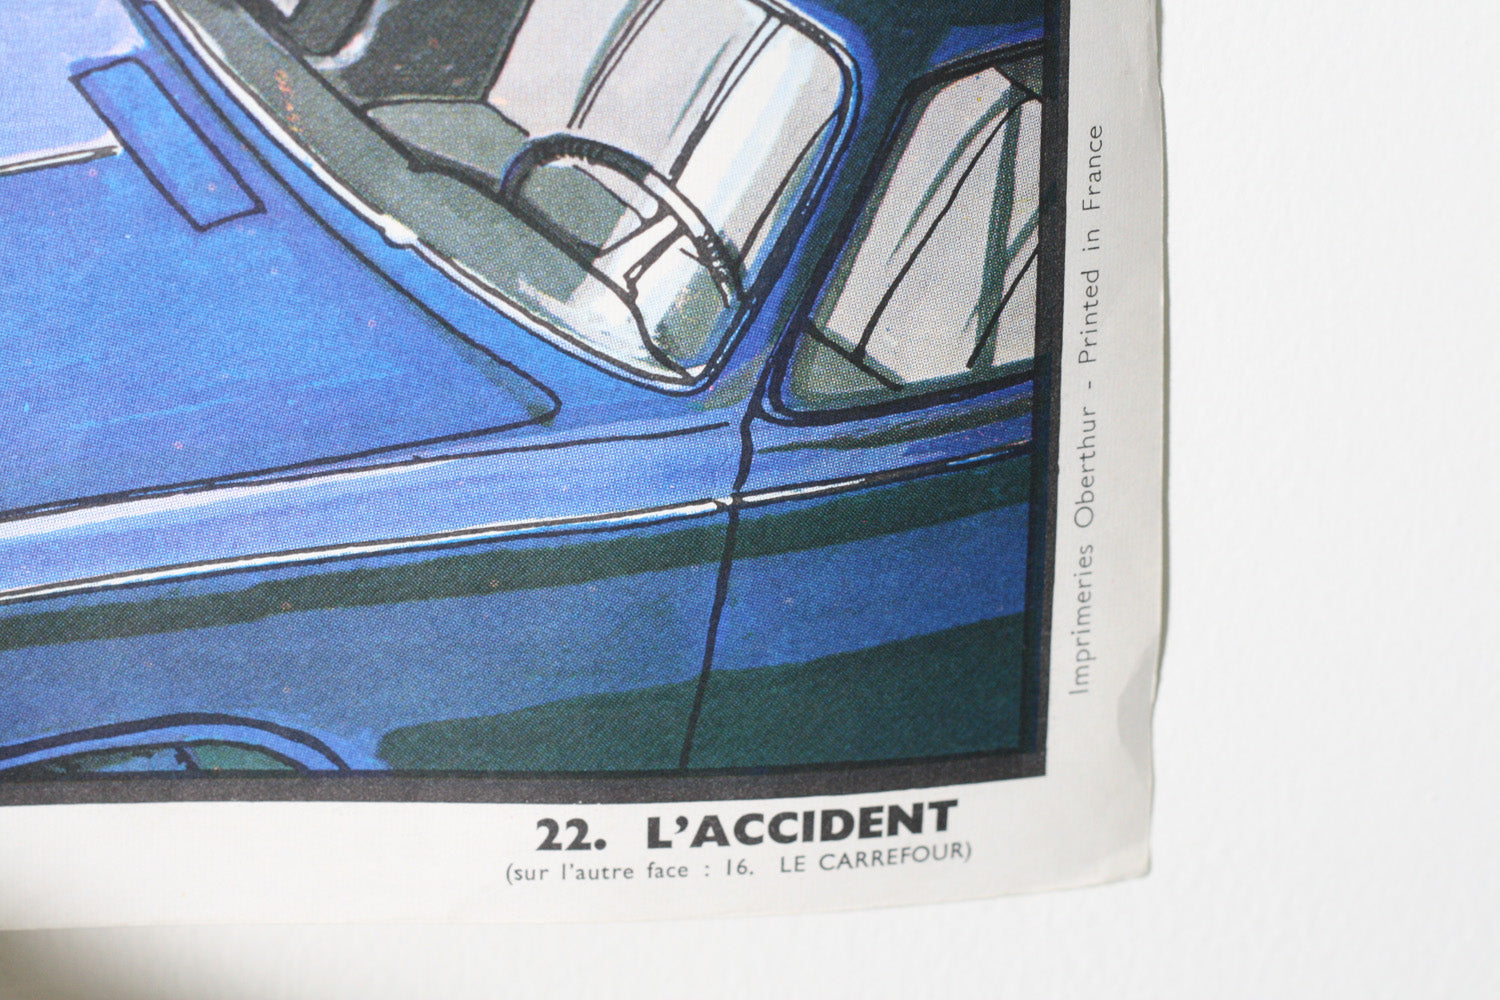 Vintage French School Poster, Le Carrefour/L'Accident